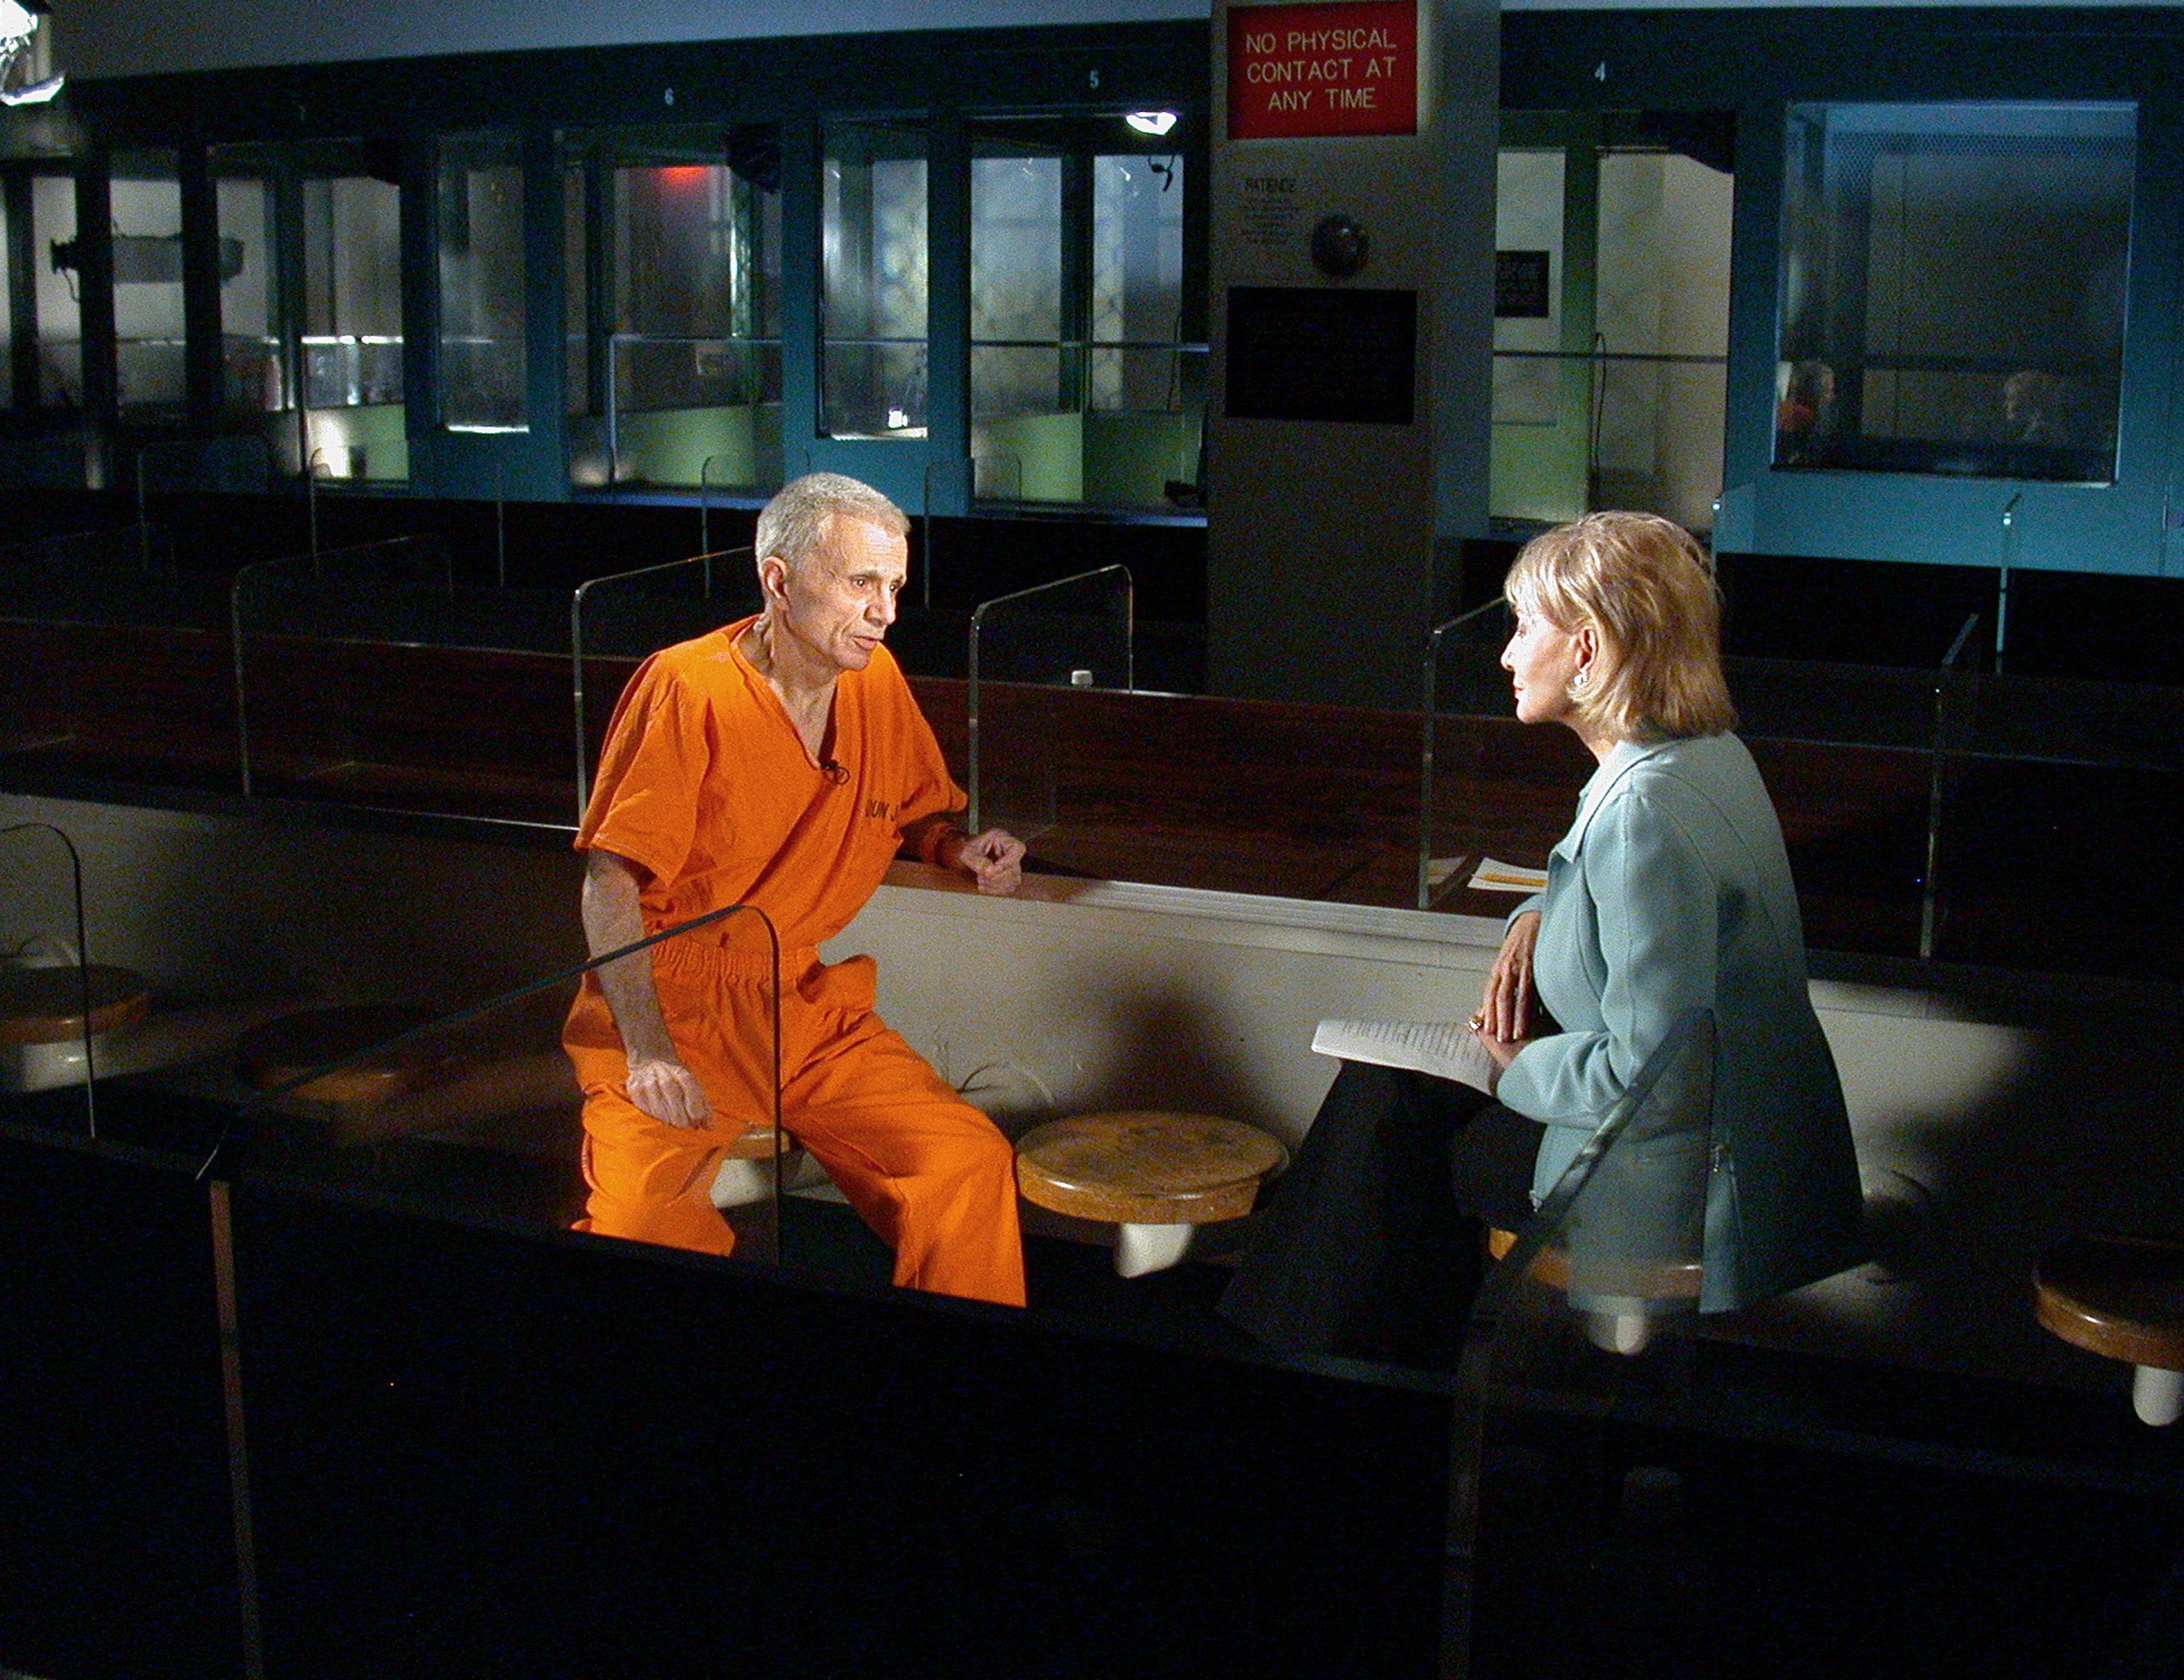 Robert Blake speaks to Barbara Walters for "20/20" from the Los Angeles County Jail on February 17, 2003 | Source: Getty Images